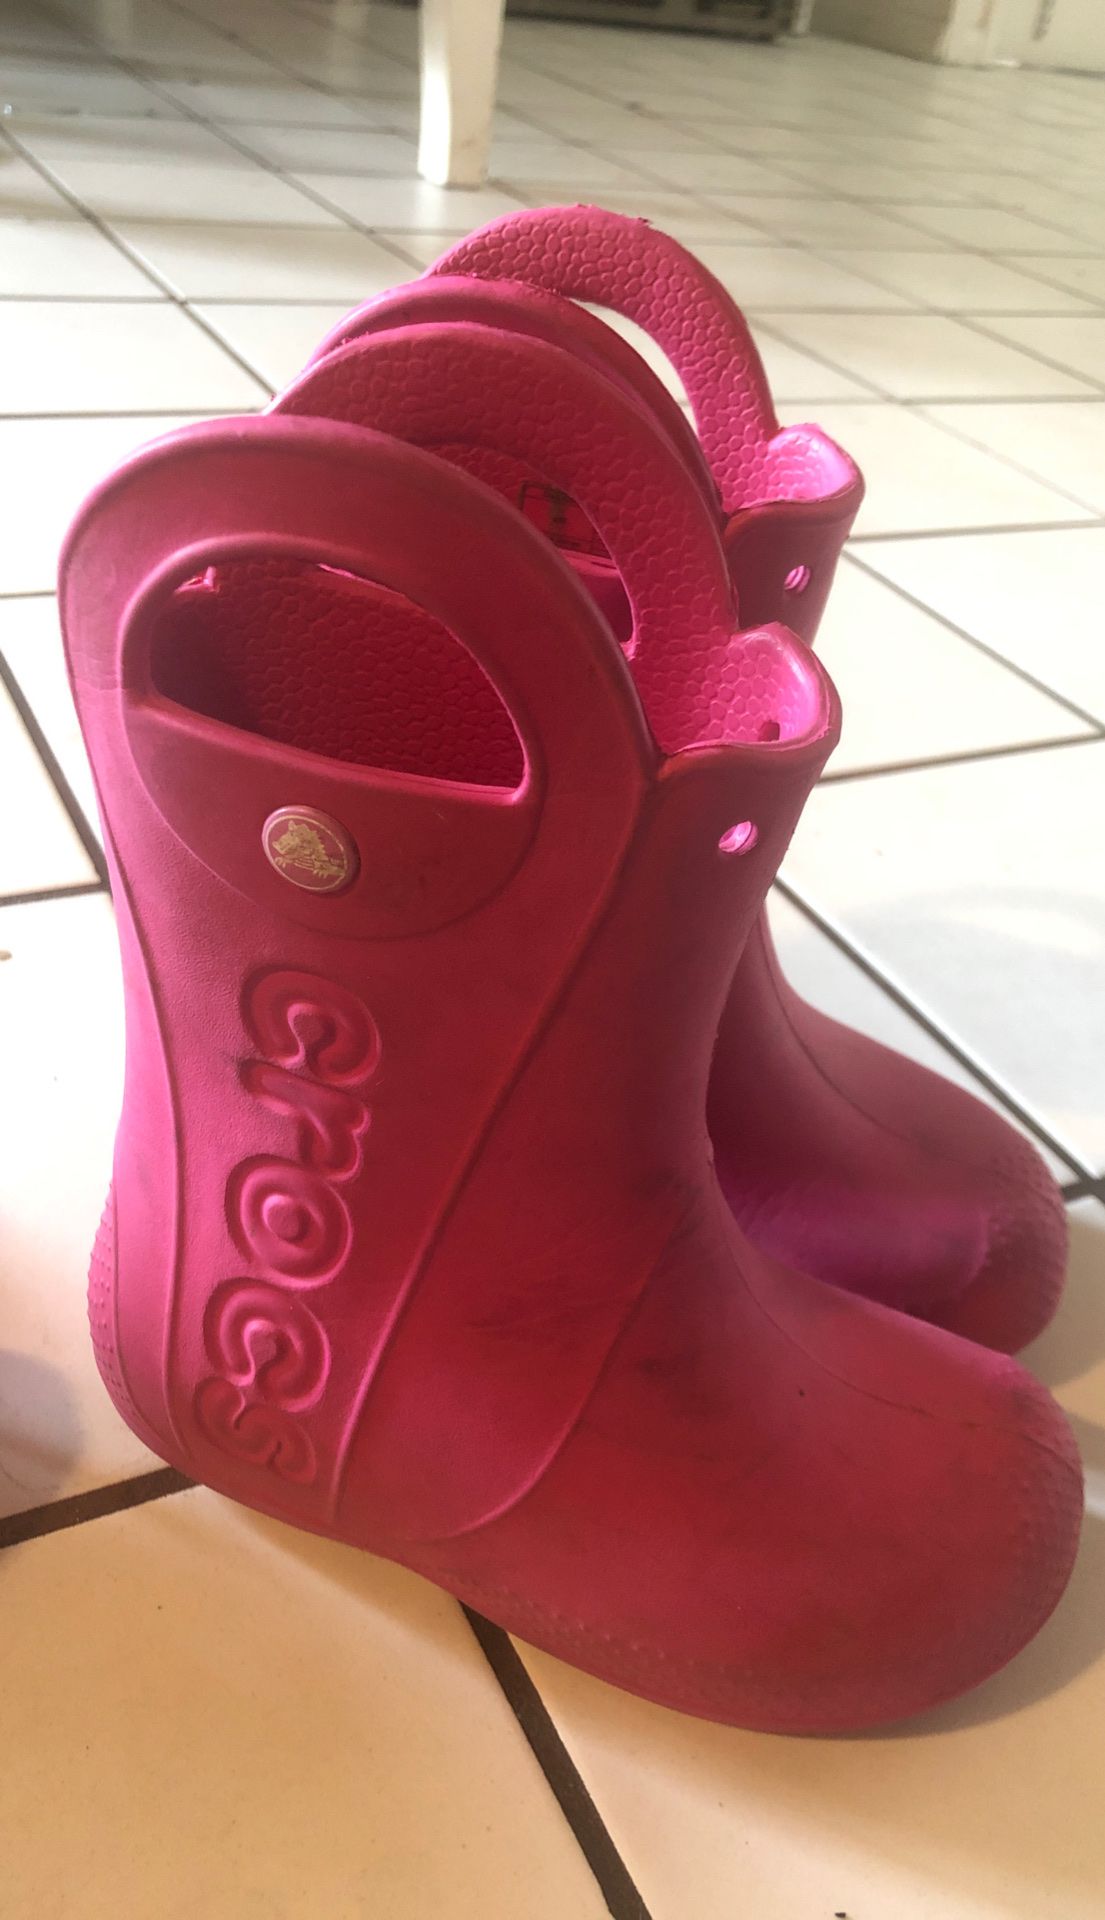 Girls hot pink pull on Crocs Boots Size 12